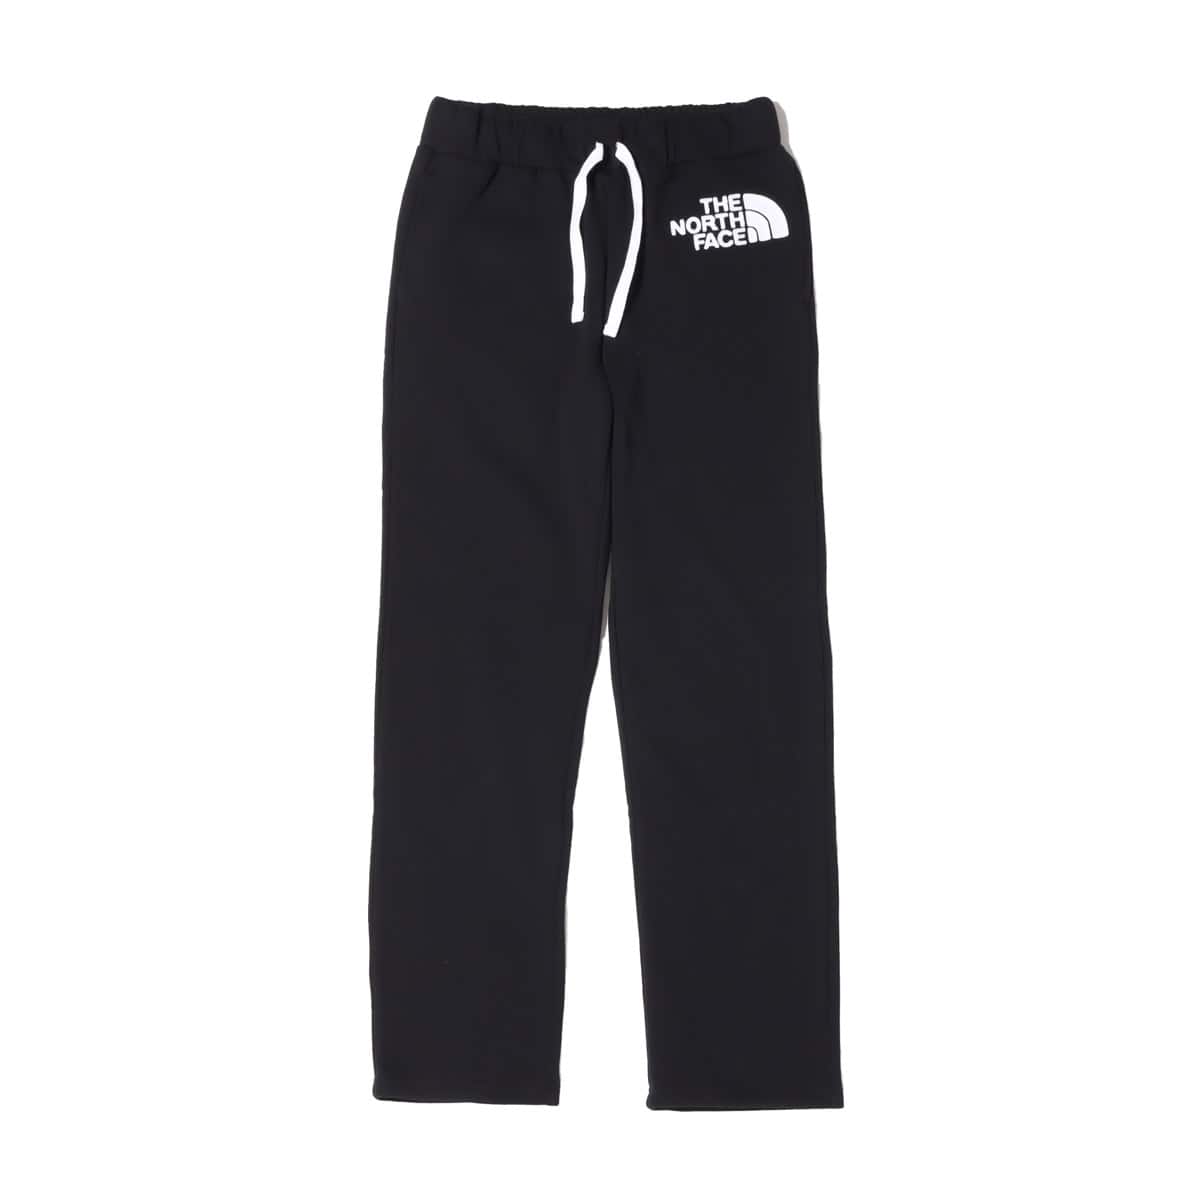 THE NORTH FACE FRONTVIEW PANT ブラック 21FW-I